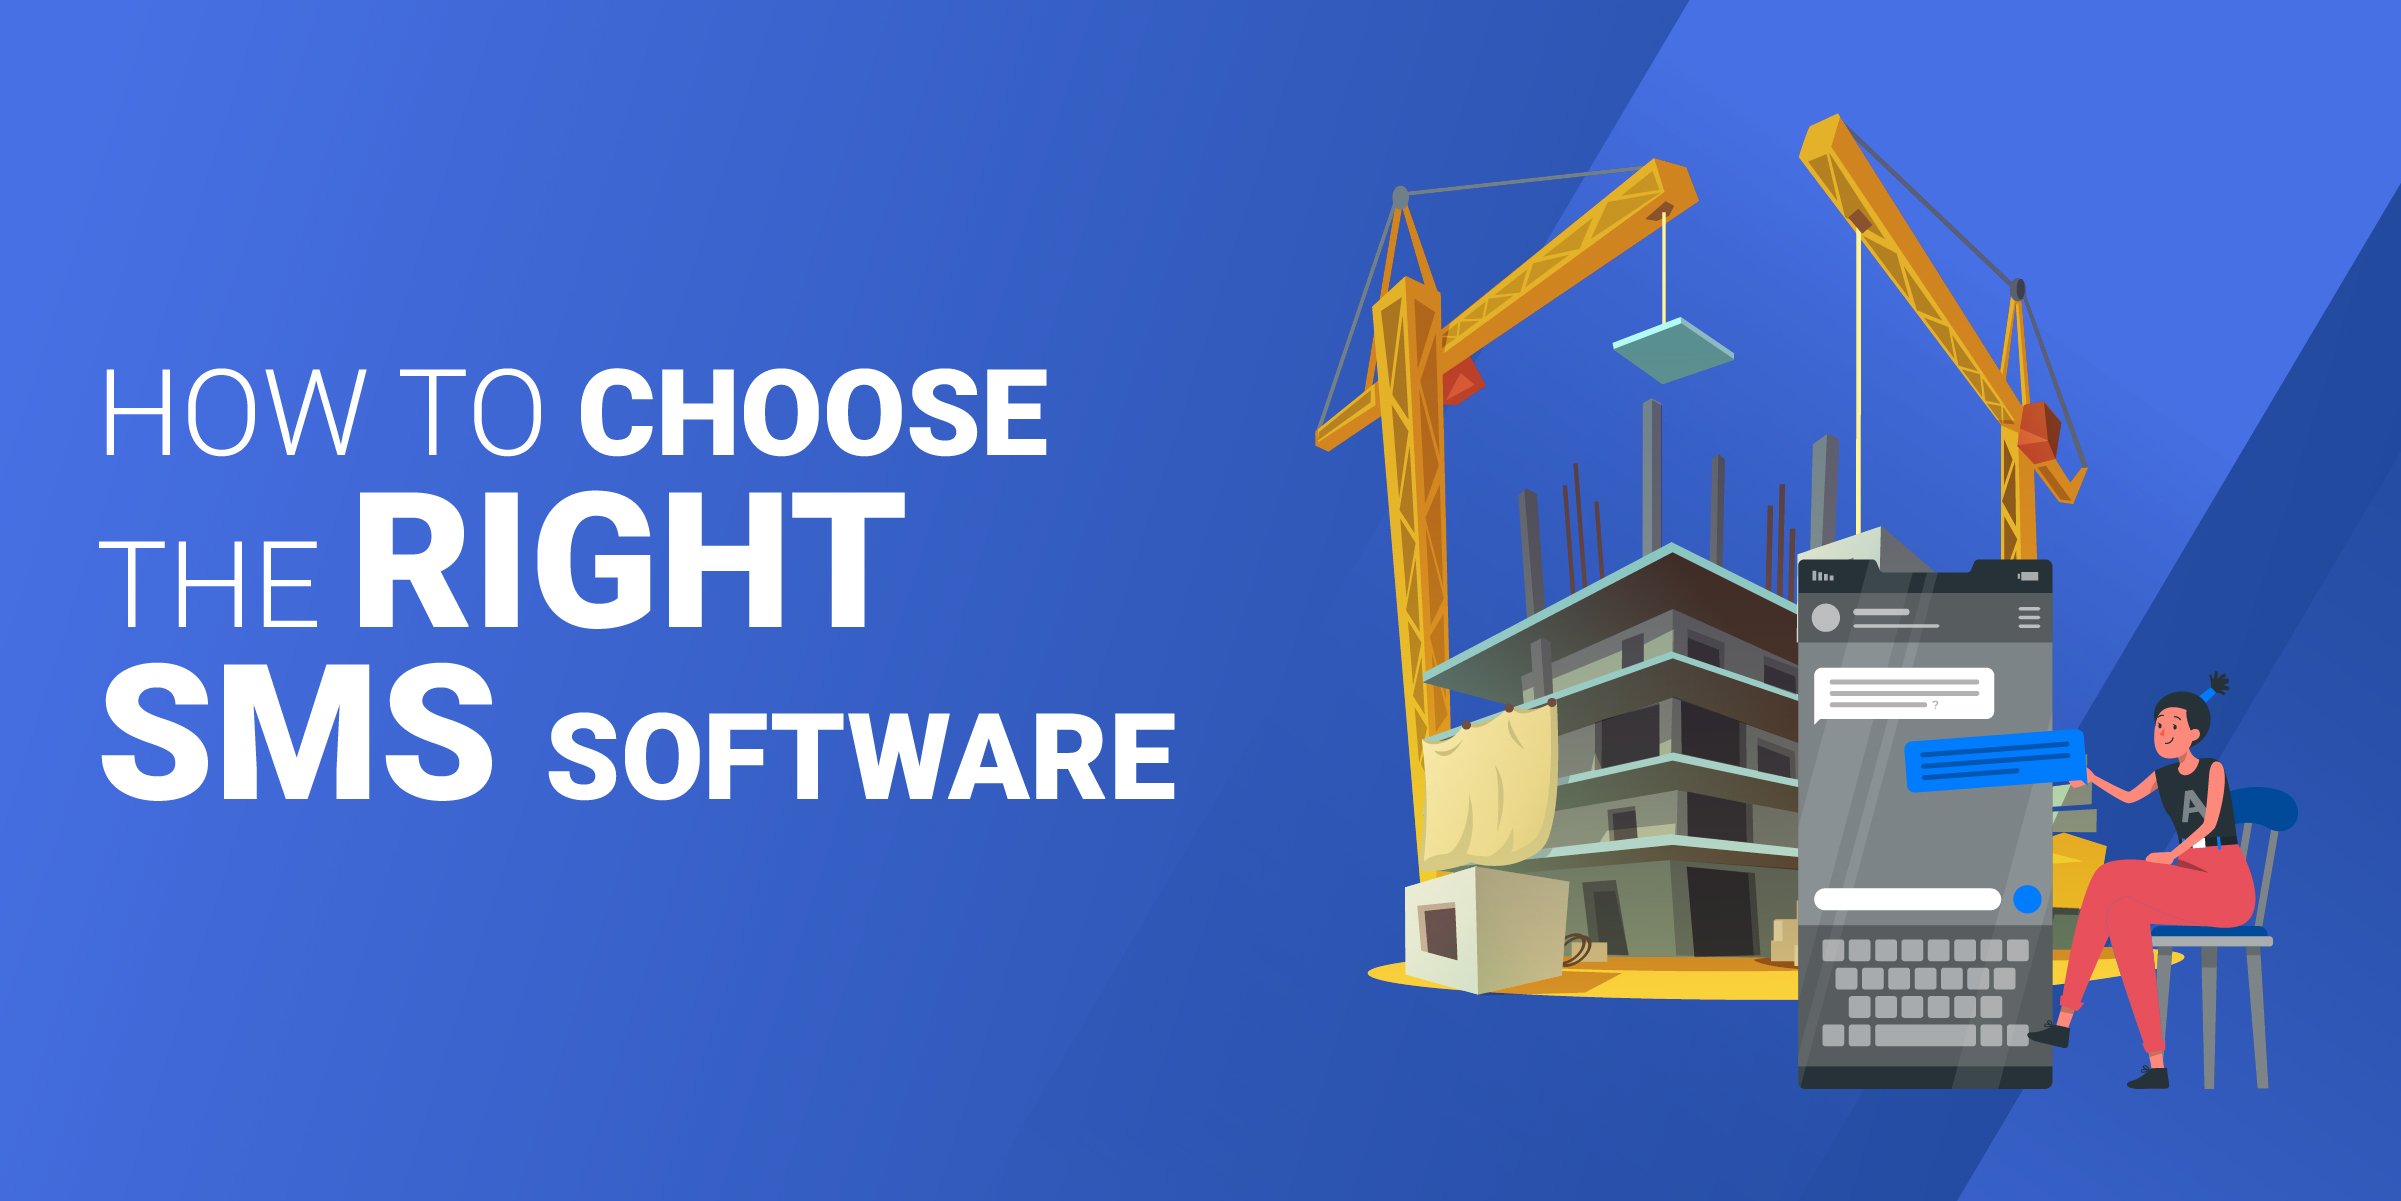 How to Choose Right SMS Software